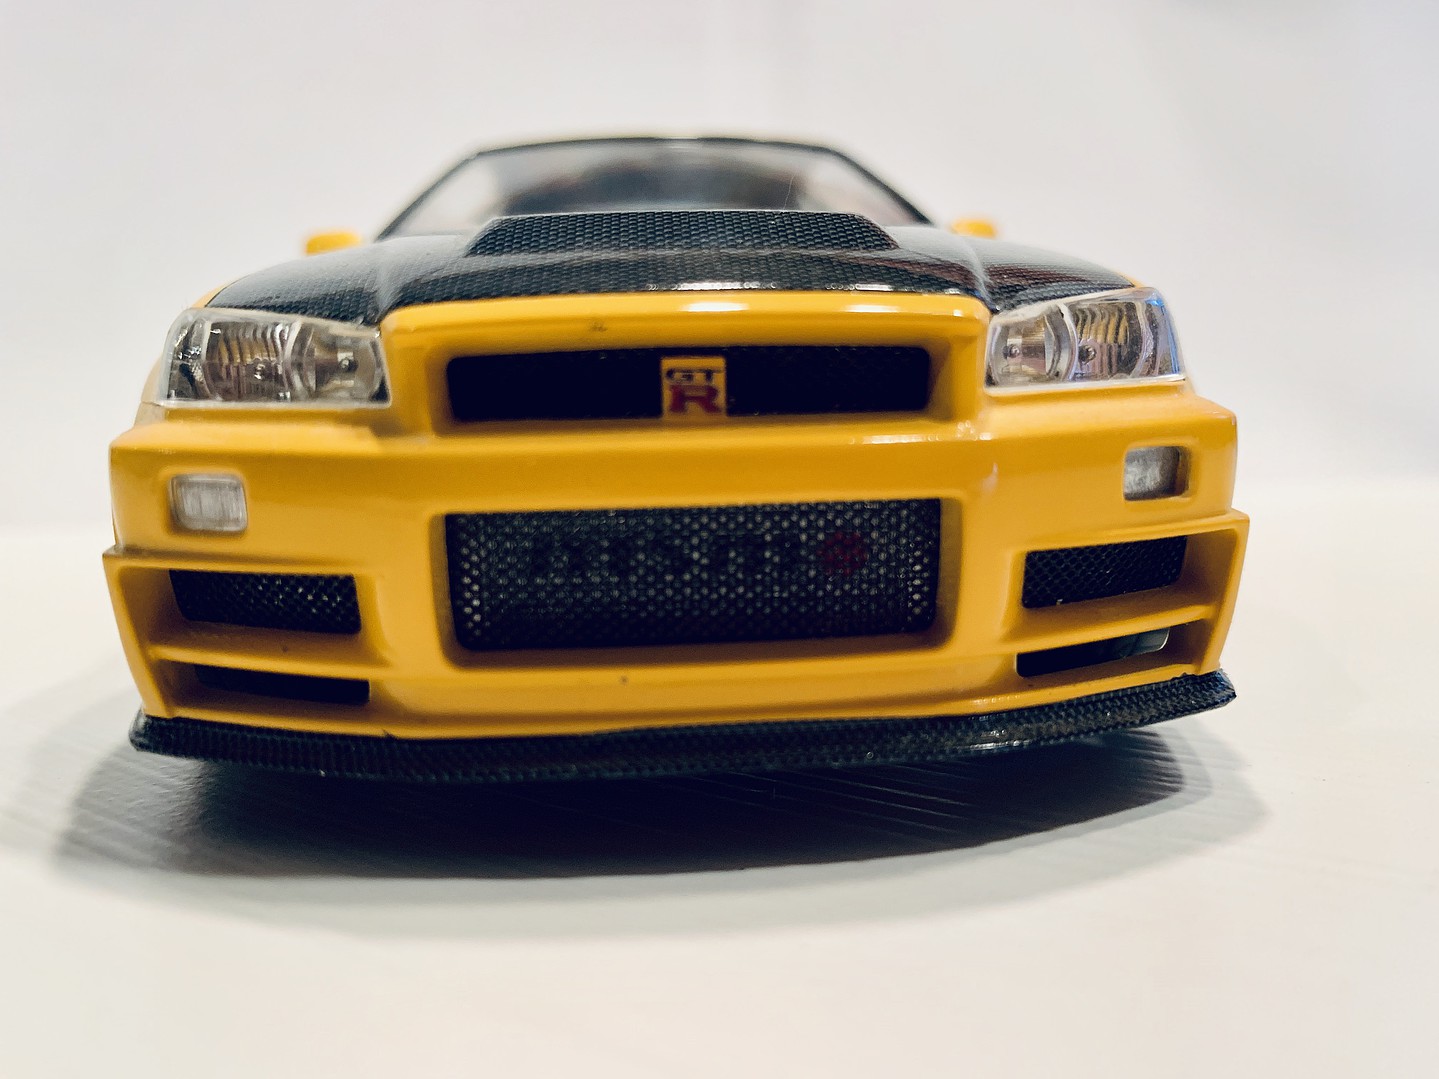 Nismo R34 GT-R Z-Tune Sportscar -- Plastic Model Car Kit -- 1/24 Scale -- # 24282 pictures by odell.js